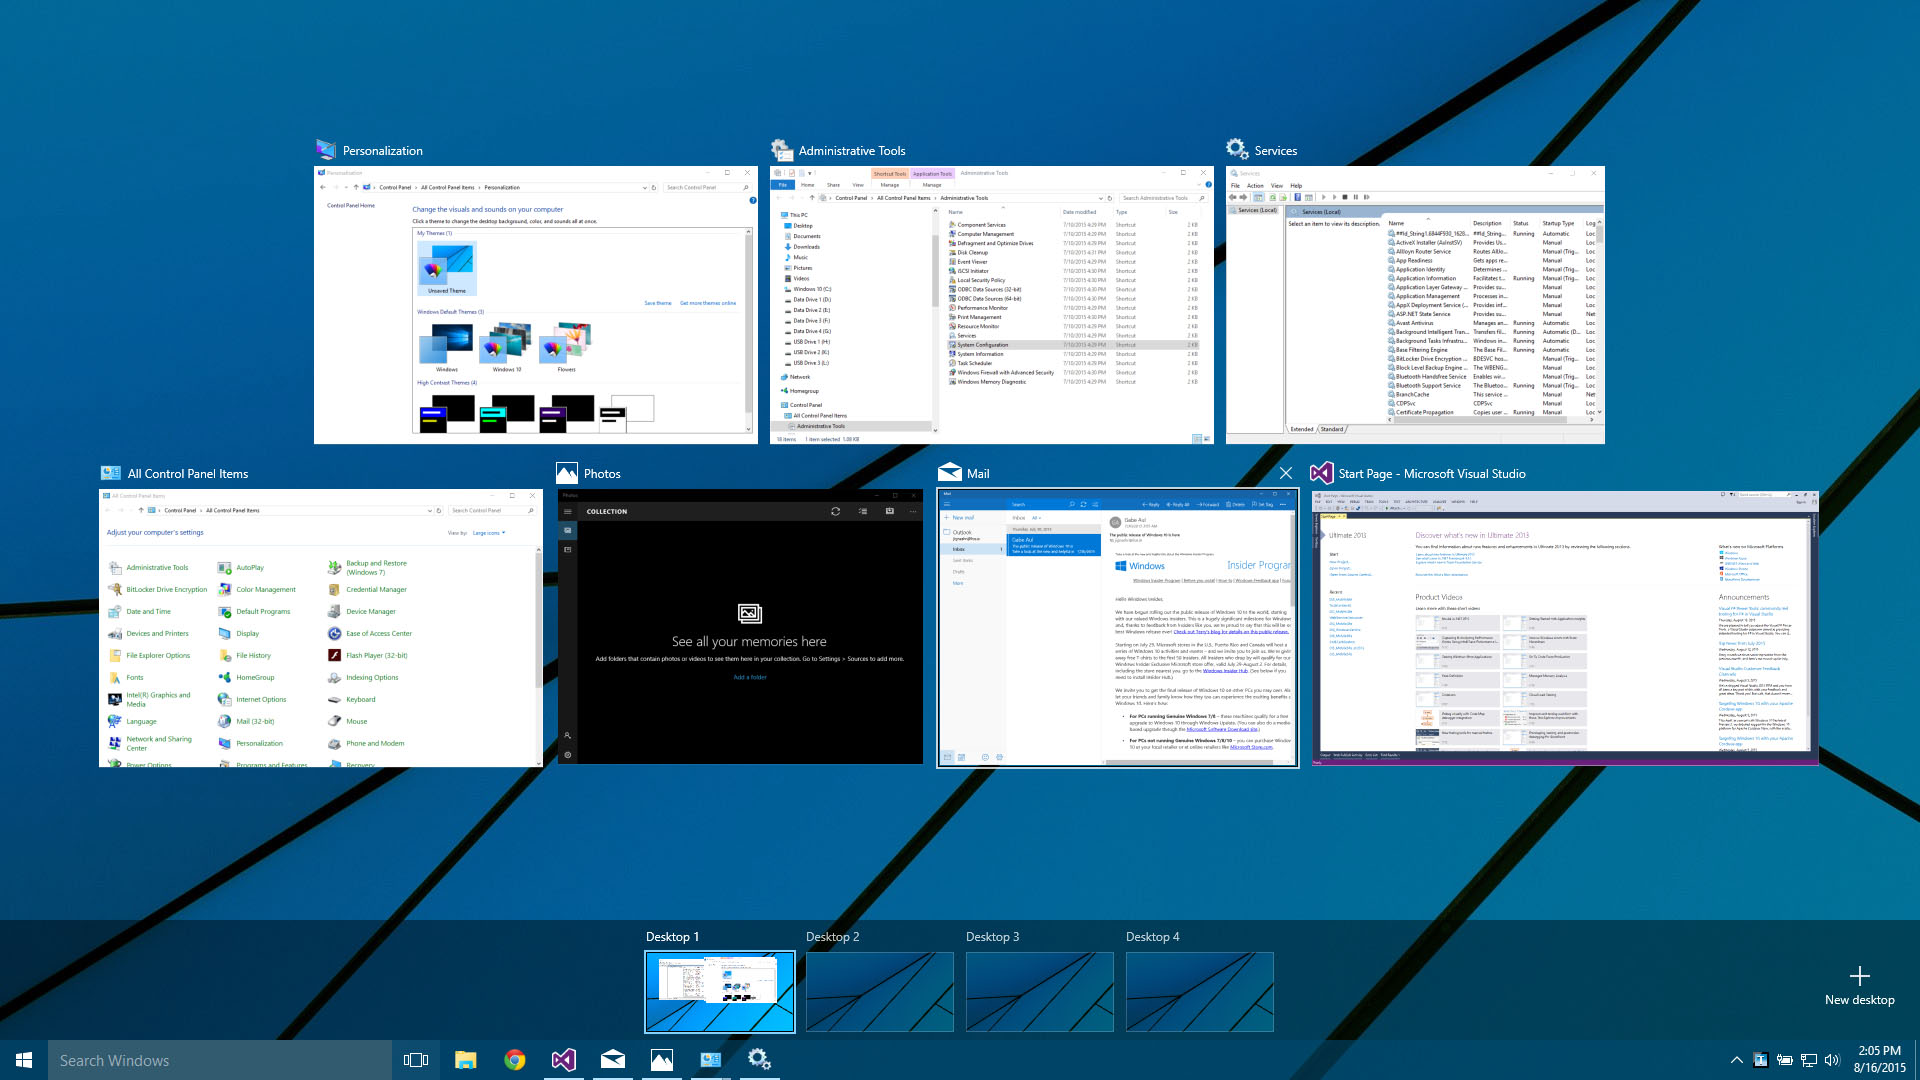 Windows 10 Review: What Makes it The Best Windows Yet